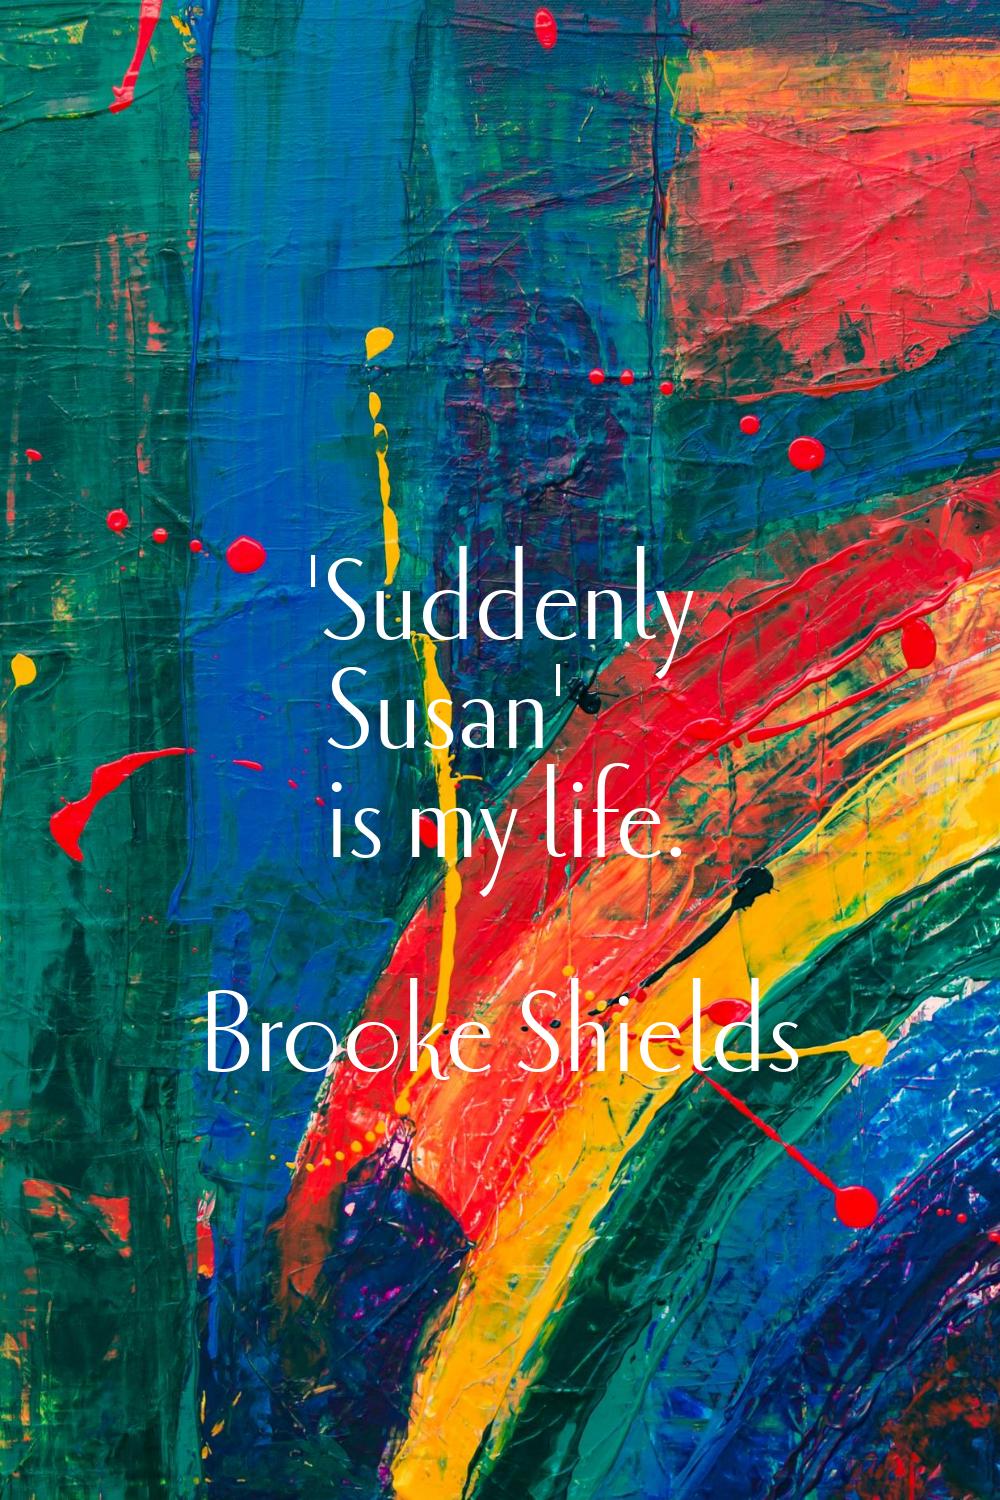 'Suddenly Susan' is my life.